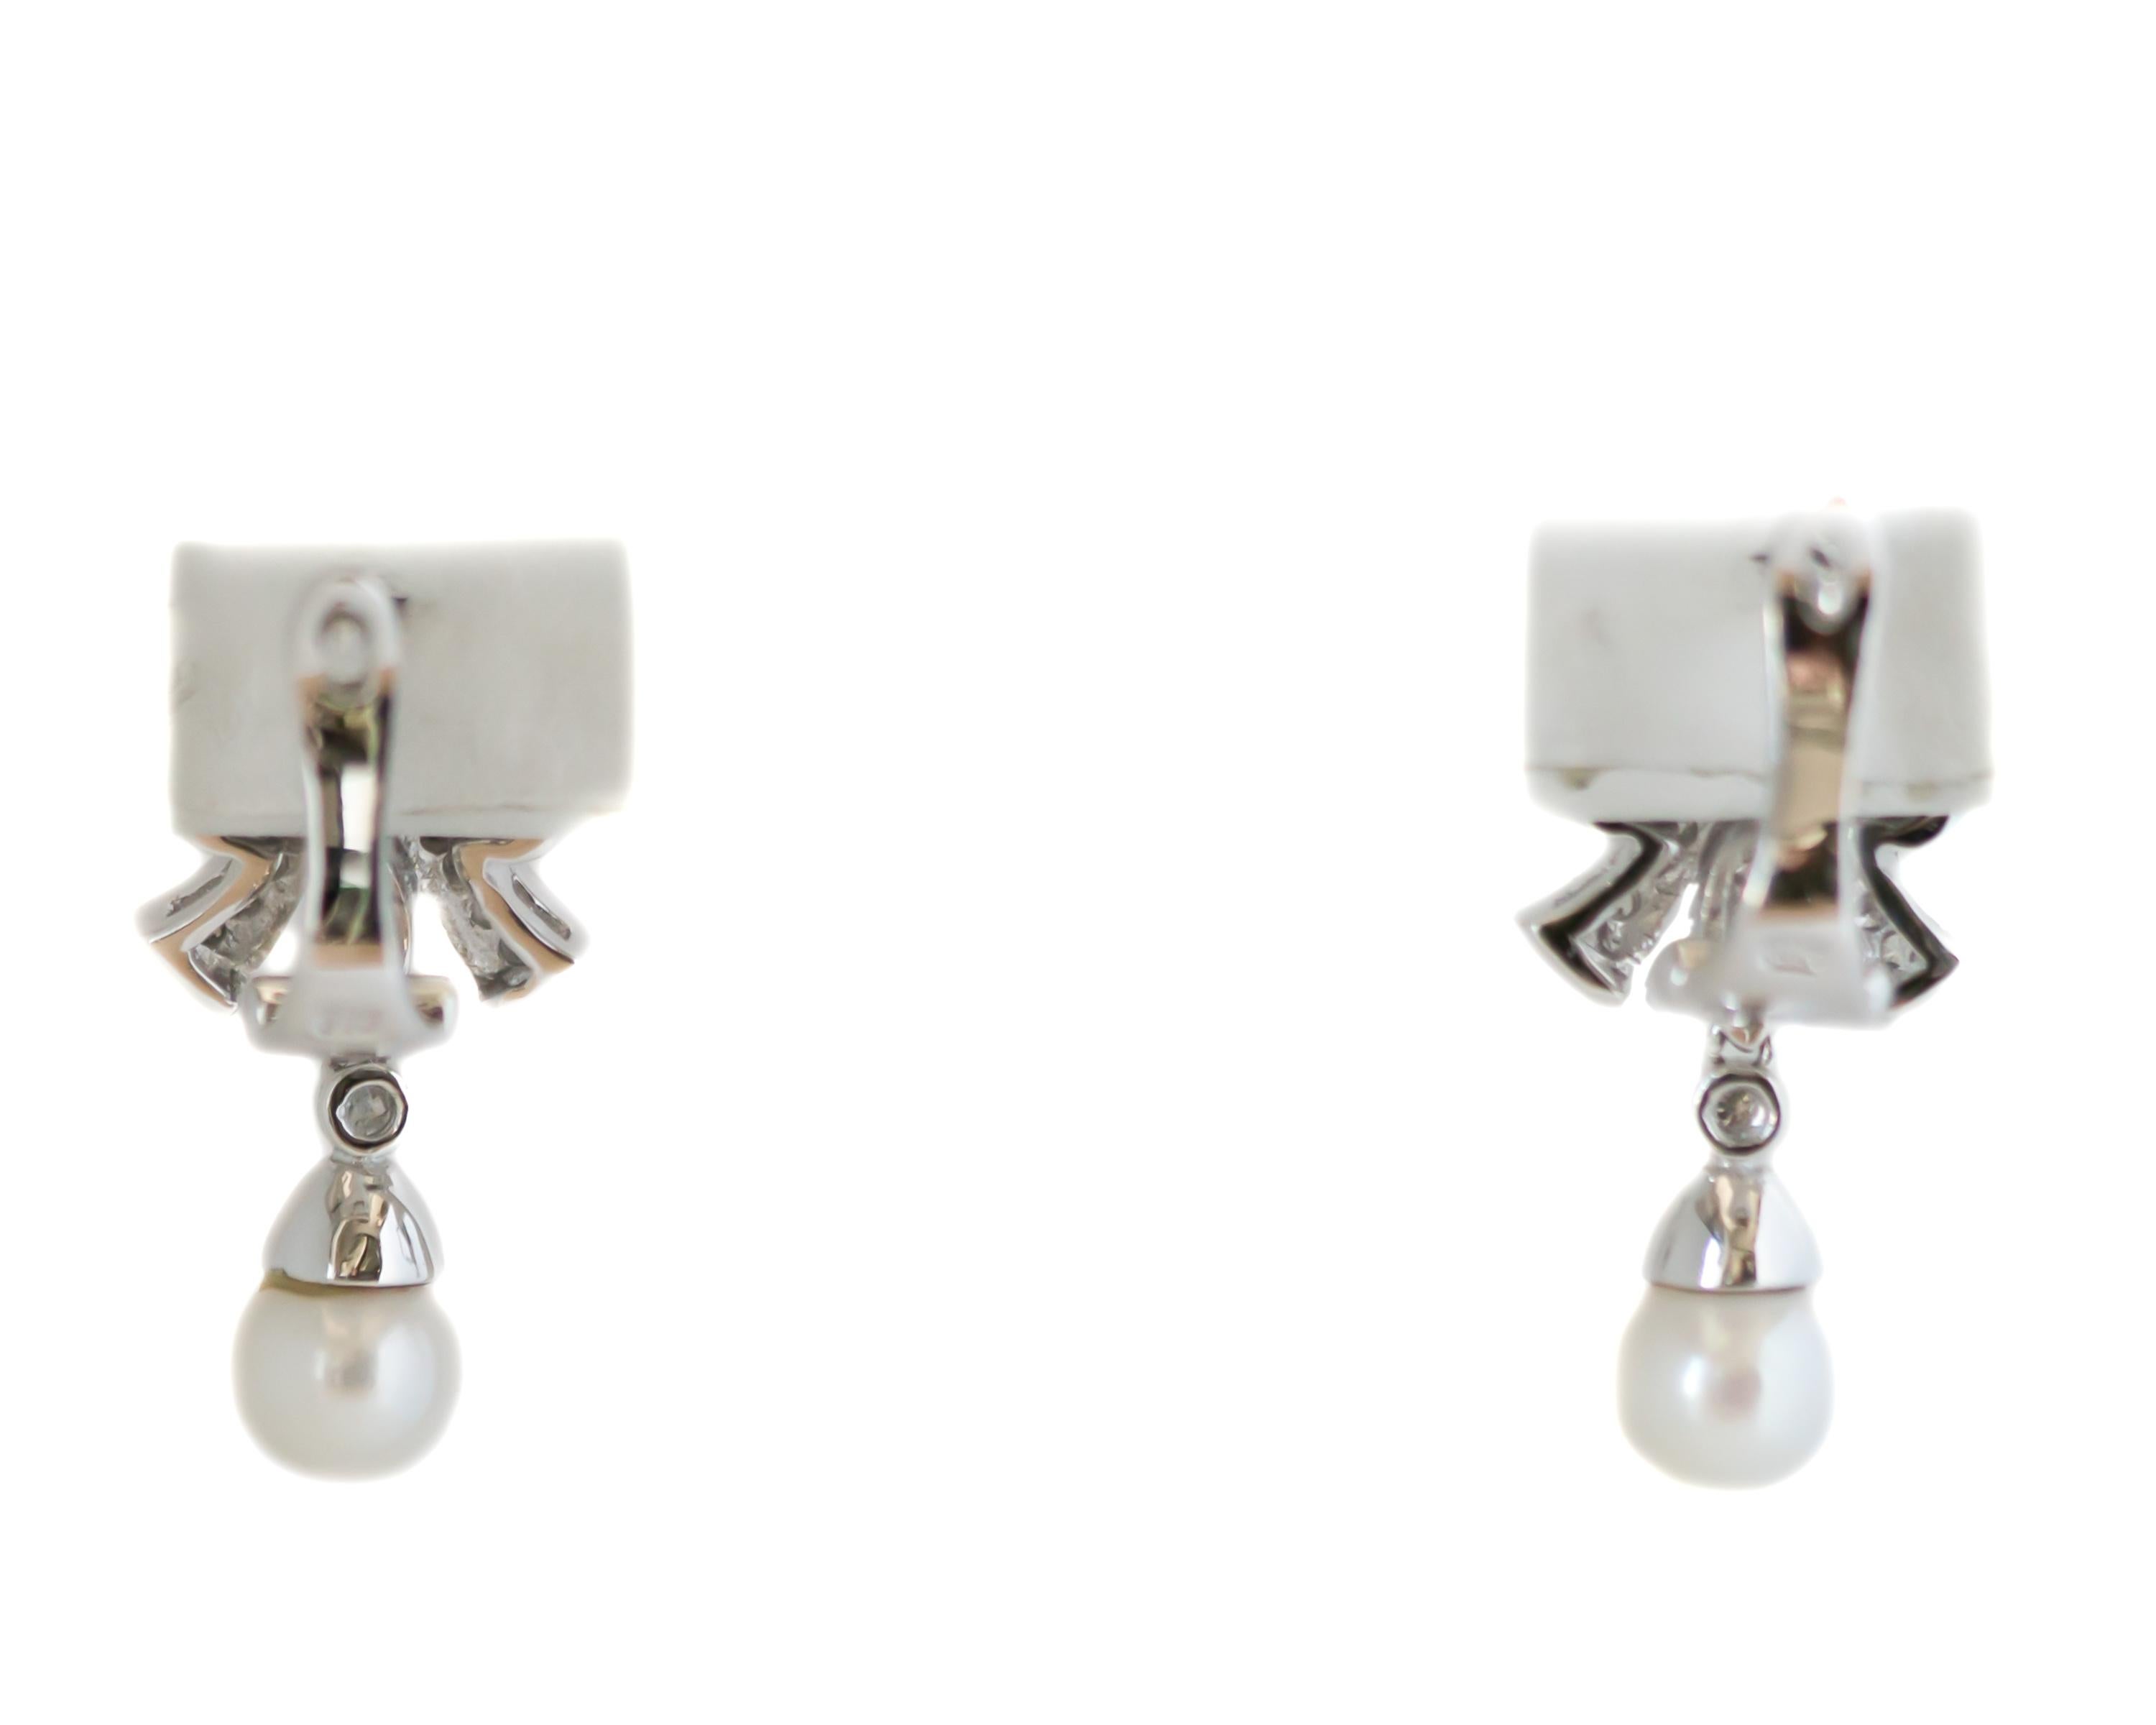 1950s Retro Diamond Chandelier Earrings - 14 Karat White Gold, Diamonds, Pearls

Features: 
0.80 carat total Round Brilliant Diamonds
6.5 millimeter cultured Pearls (Quantity 2)
14 Karat White Gold Setting
Hinged Snap Back Posts
Ribbon Bow